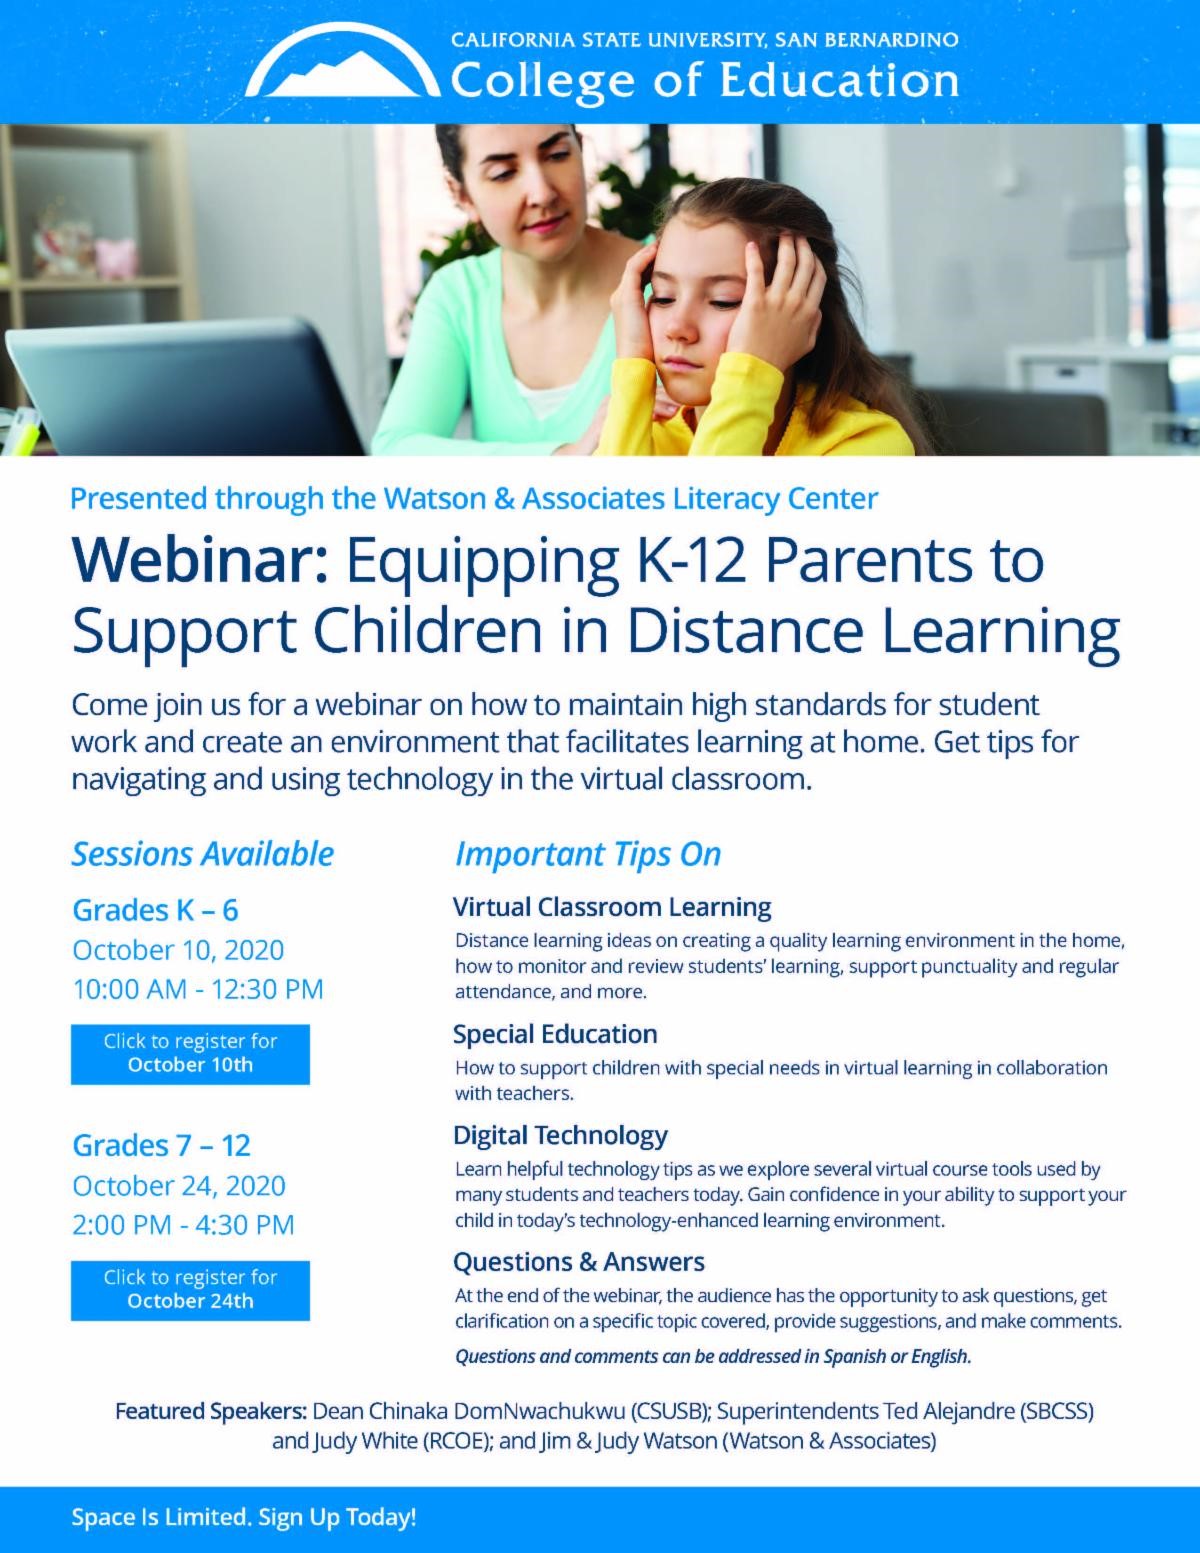 Equipping K-12 Parents to Support Children in Distance Learning (2)